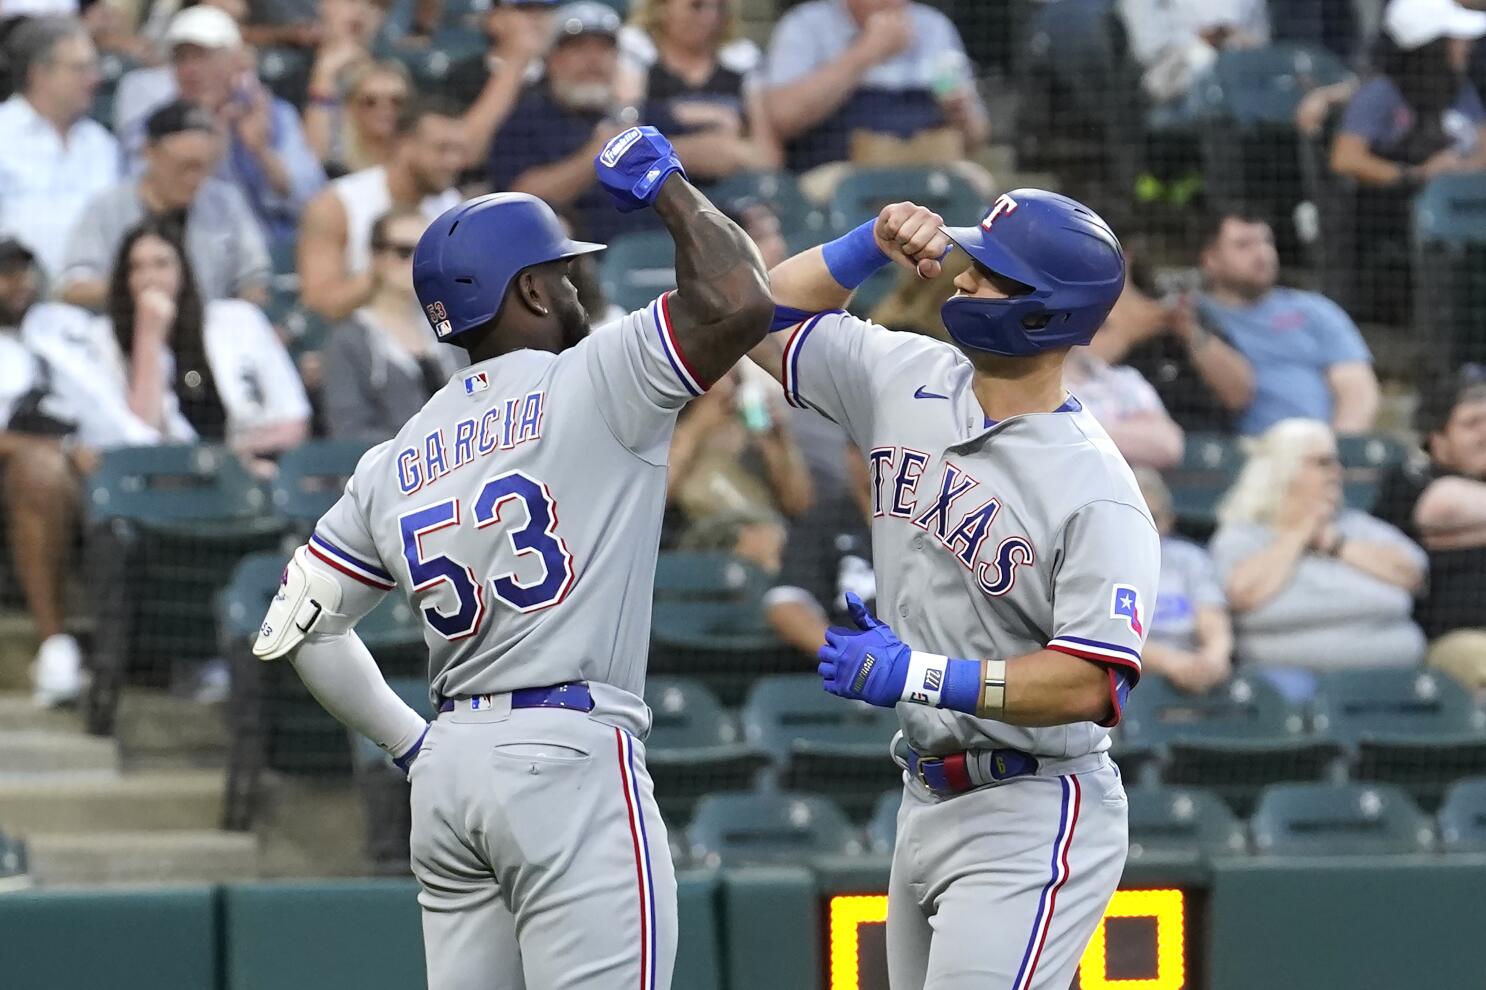 Jung hits 15th homer, Rangers hang on to beat White Sox 5-2 - The